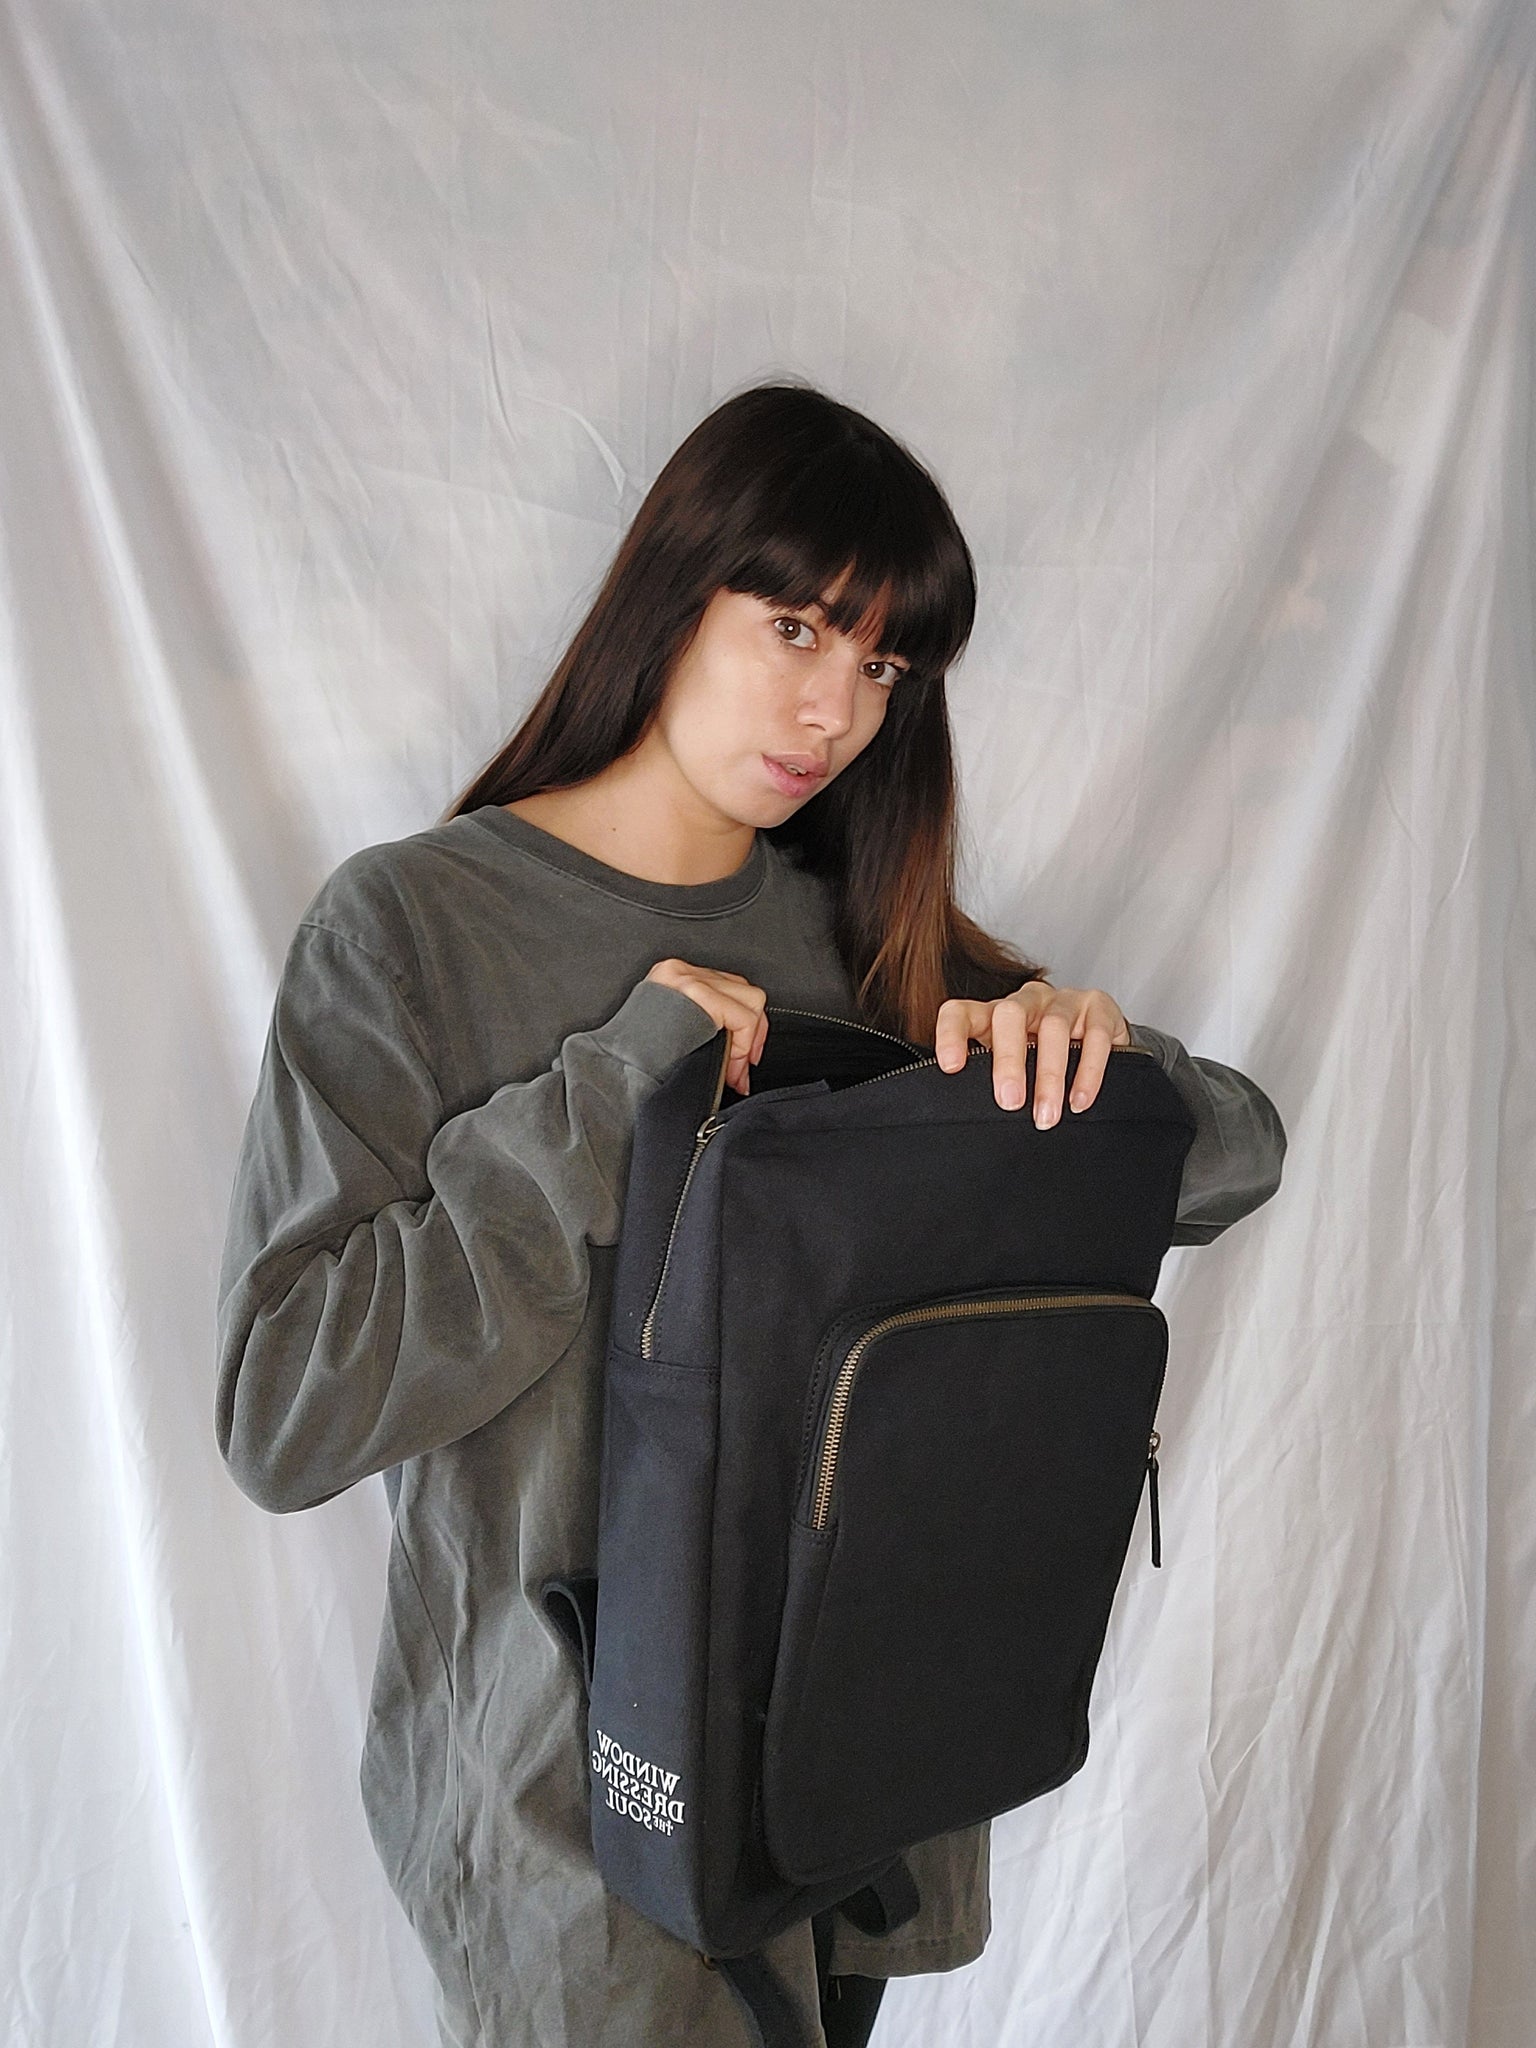 WDTS Backpack- Black Canvas - SD/LG